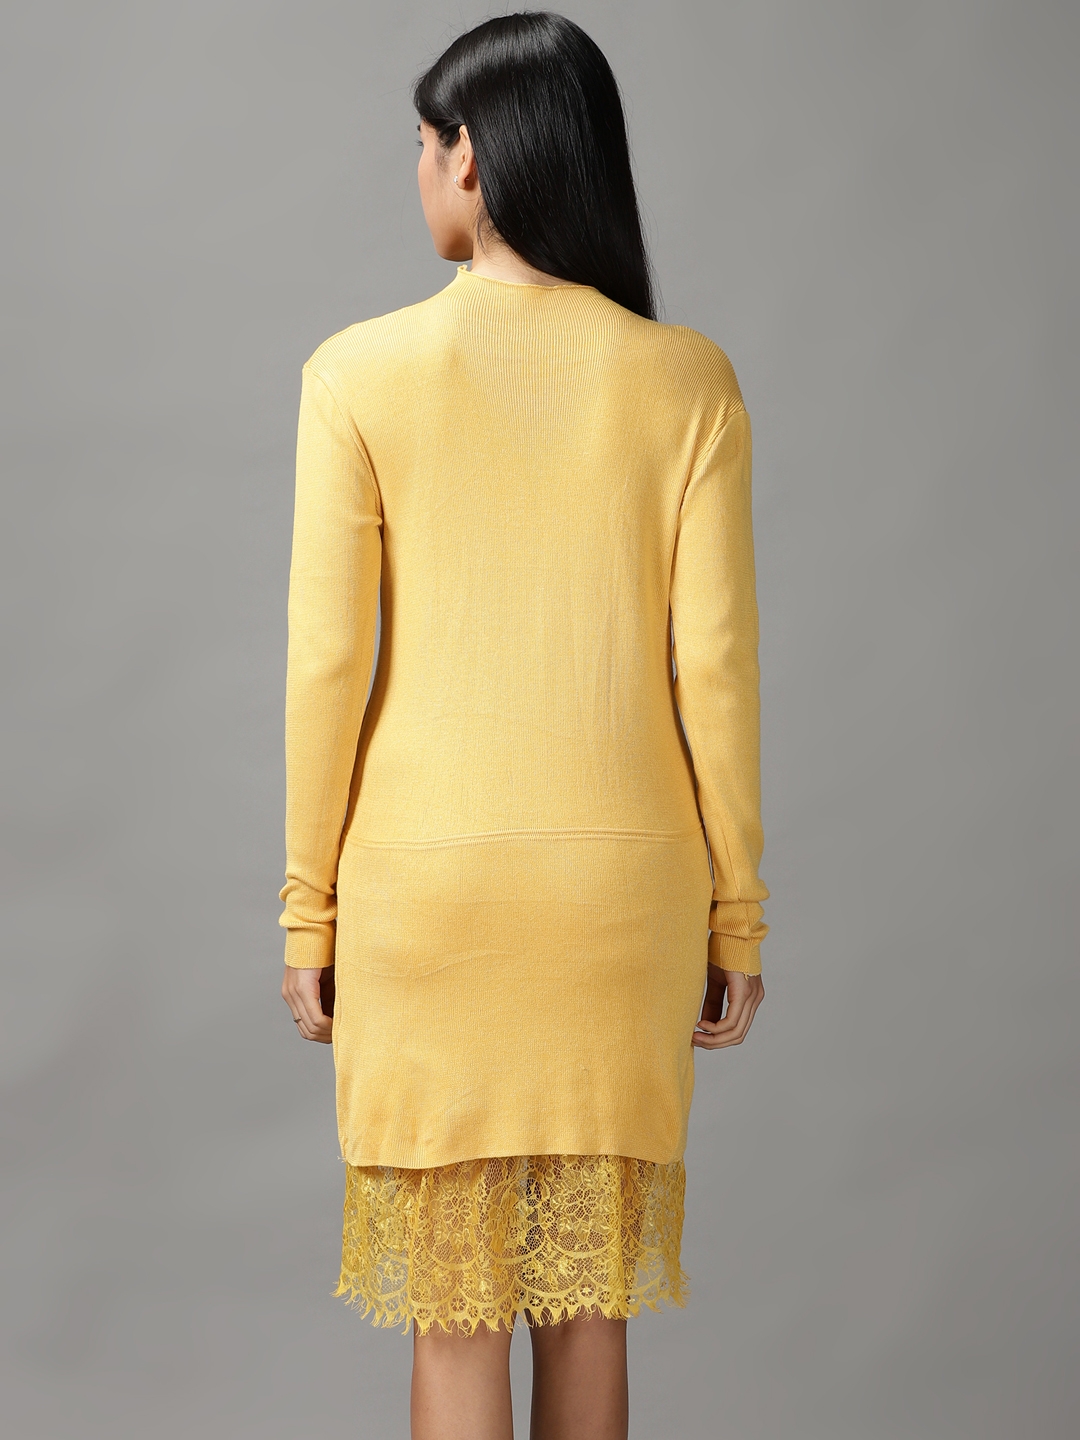 Showoff | SHOWOFF Women Yellow Solid High Neck Full Sleeves Knee length Bodycon Dress 3